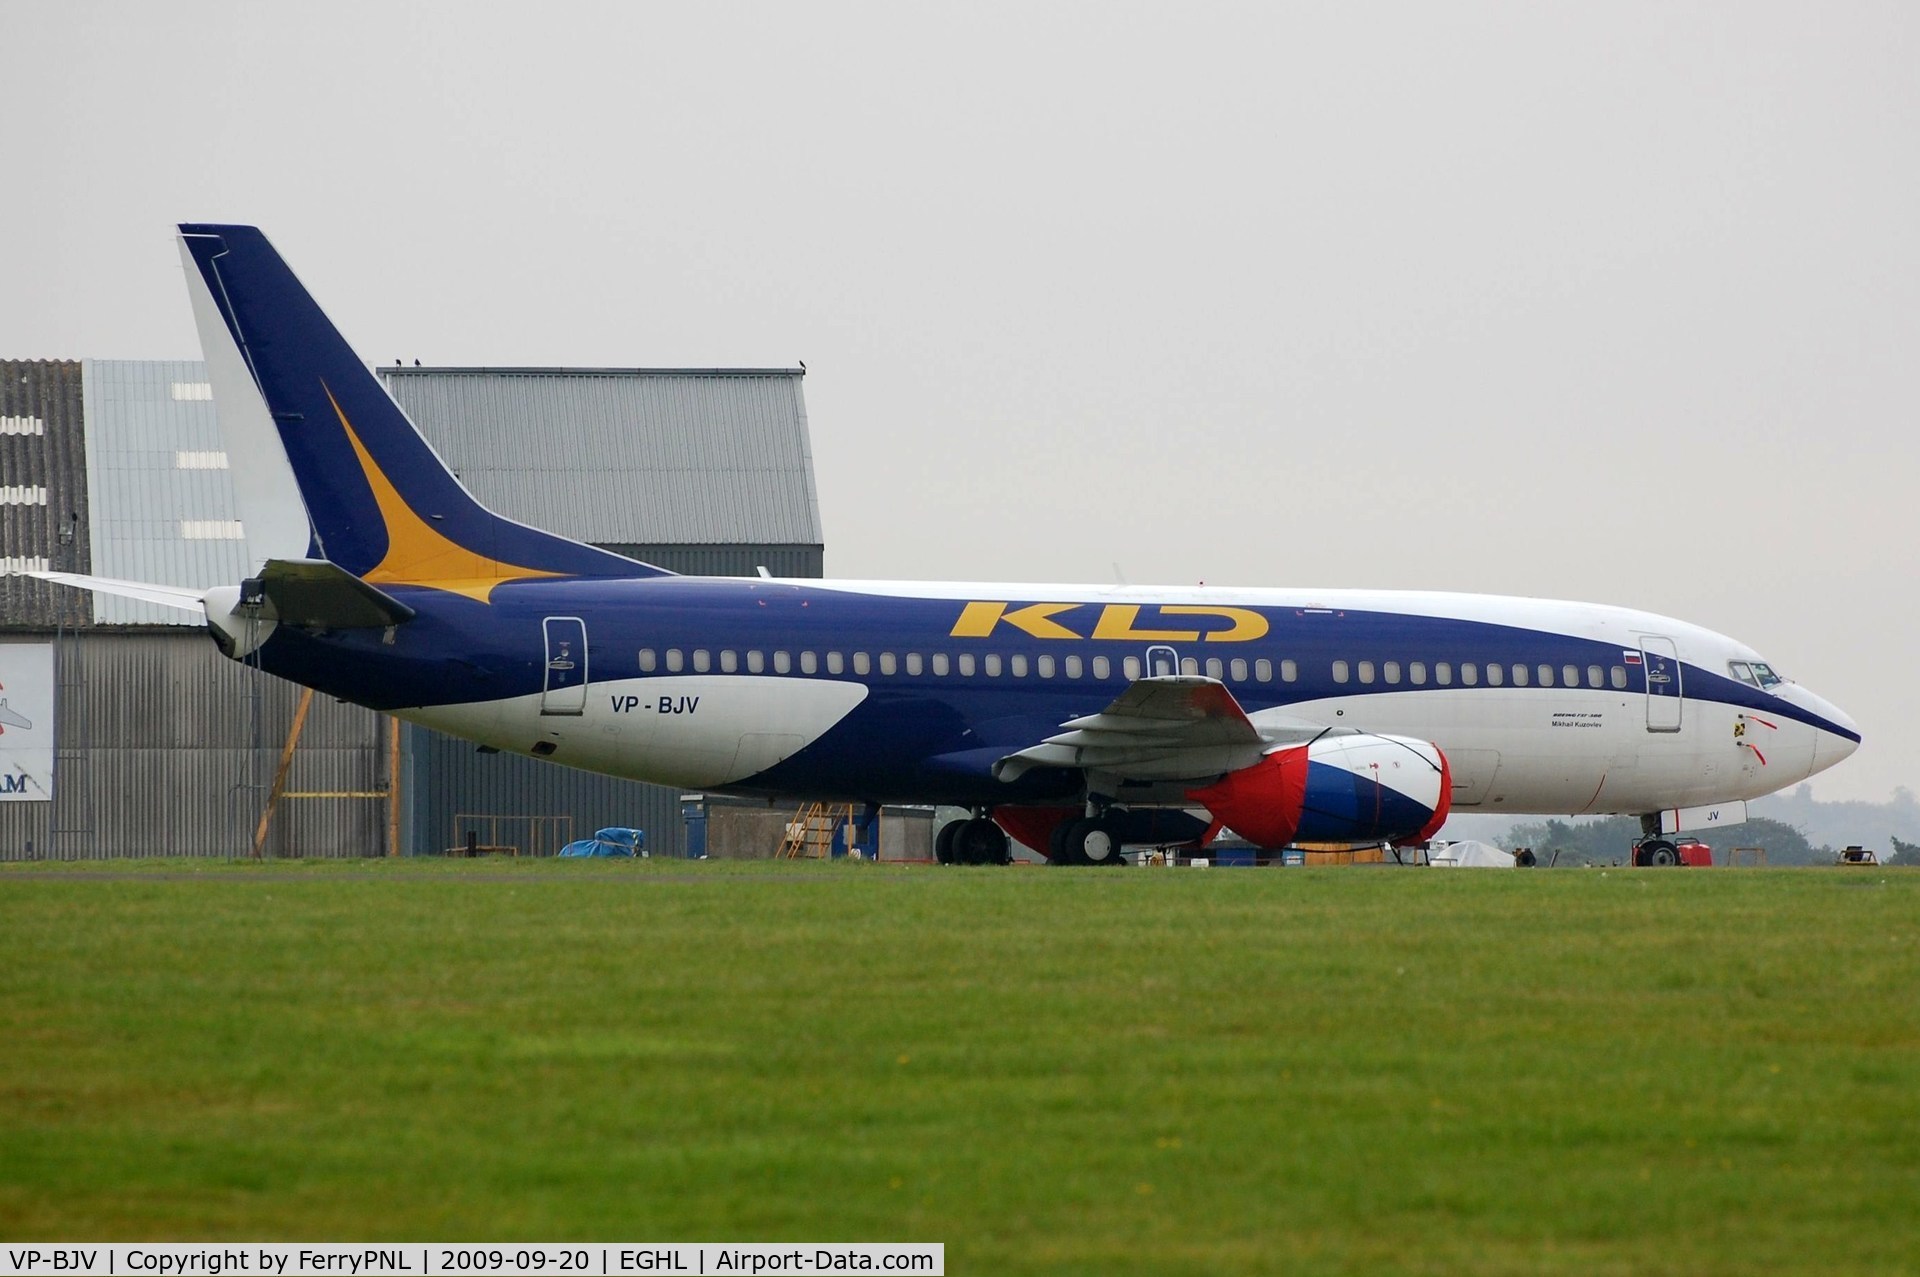 VP-BJV, 1986 Boeing 737-3Q8 C/N 23507, KD Avia B733 stored in Lasham in 2009 and subsequently scrapped.